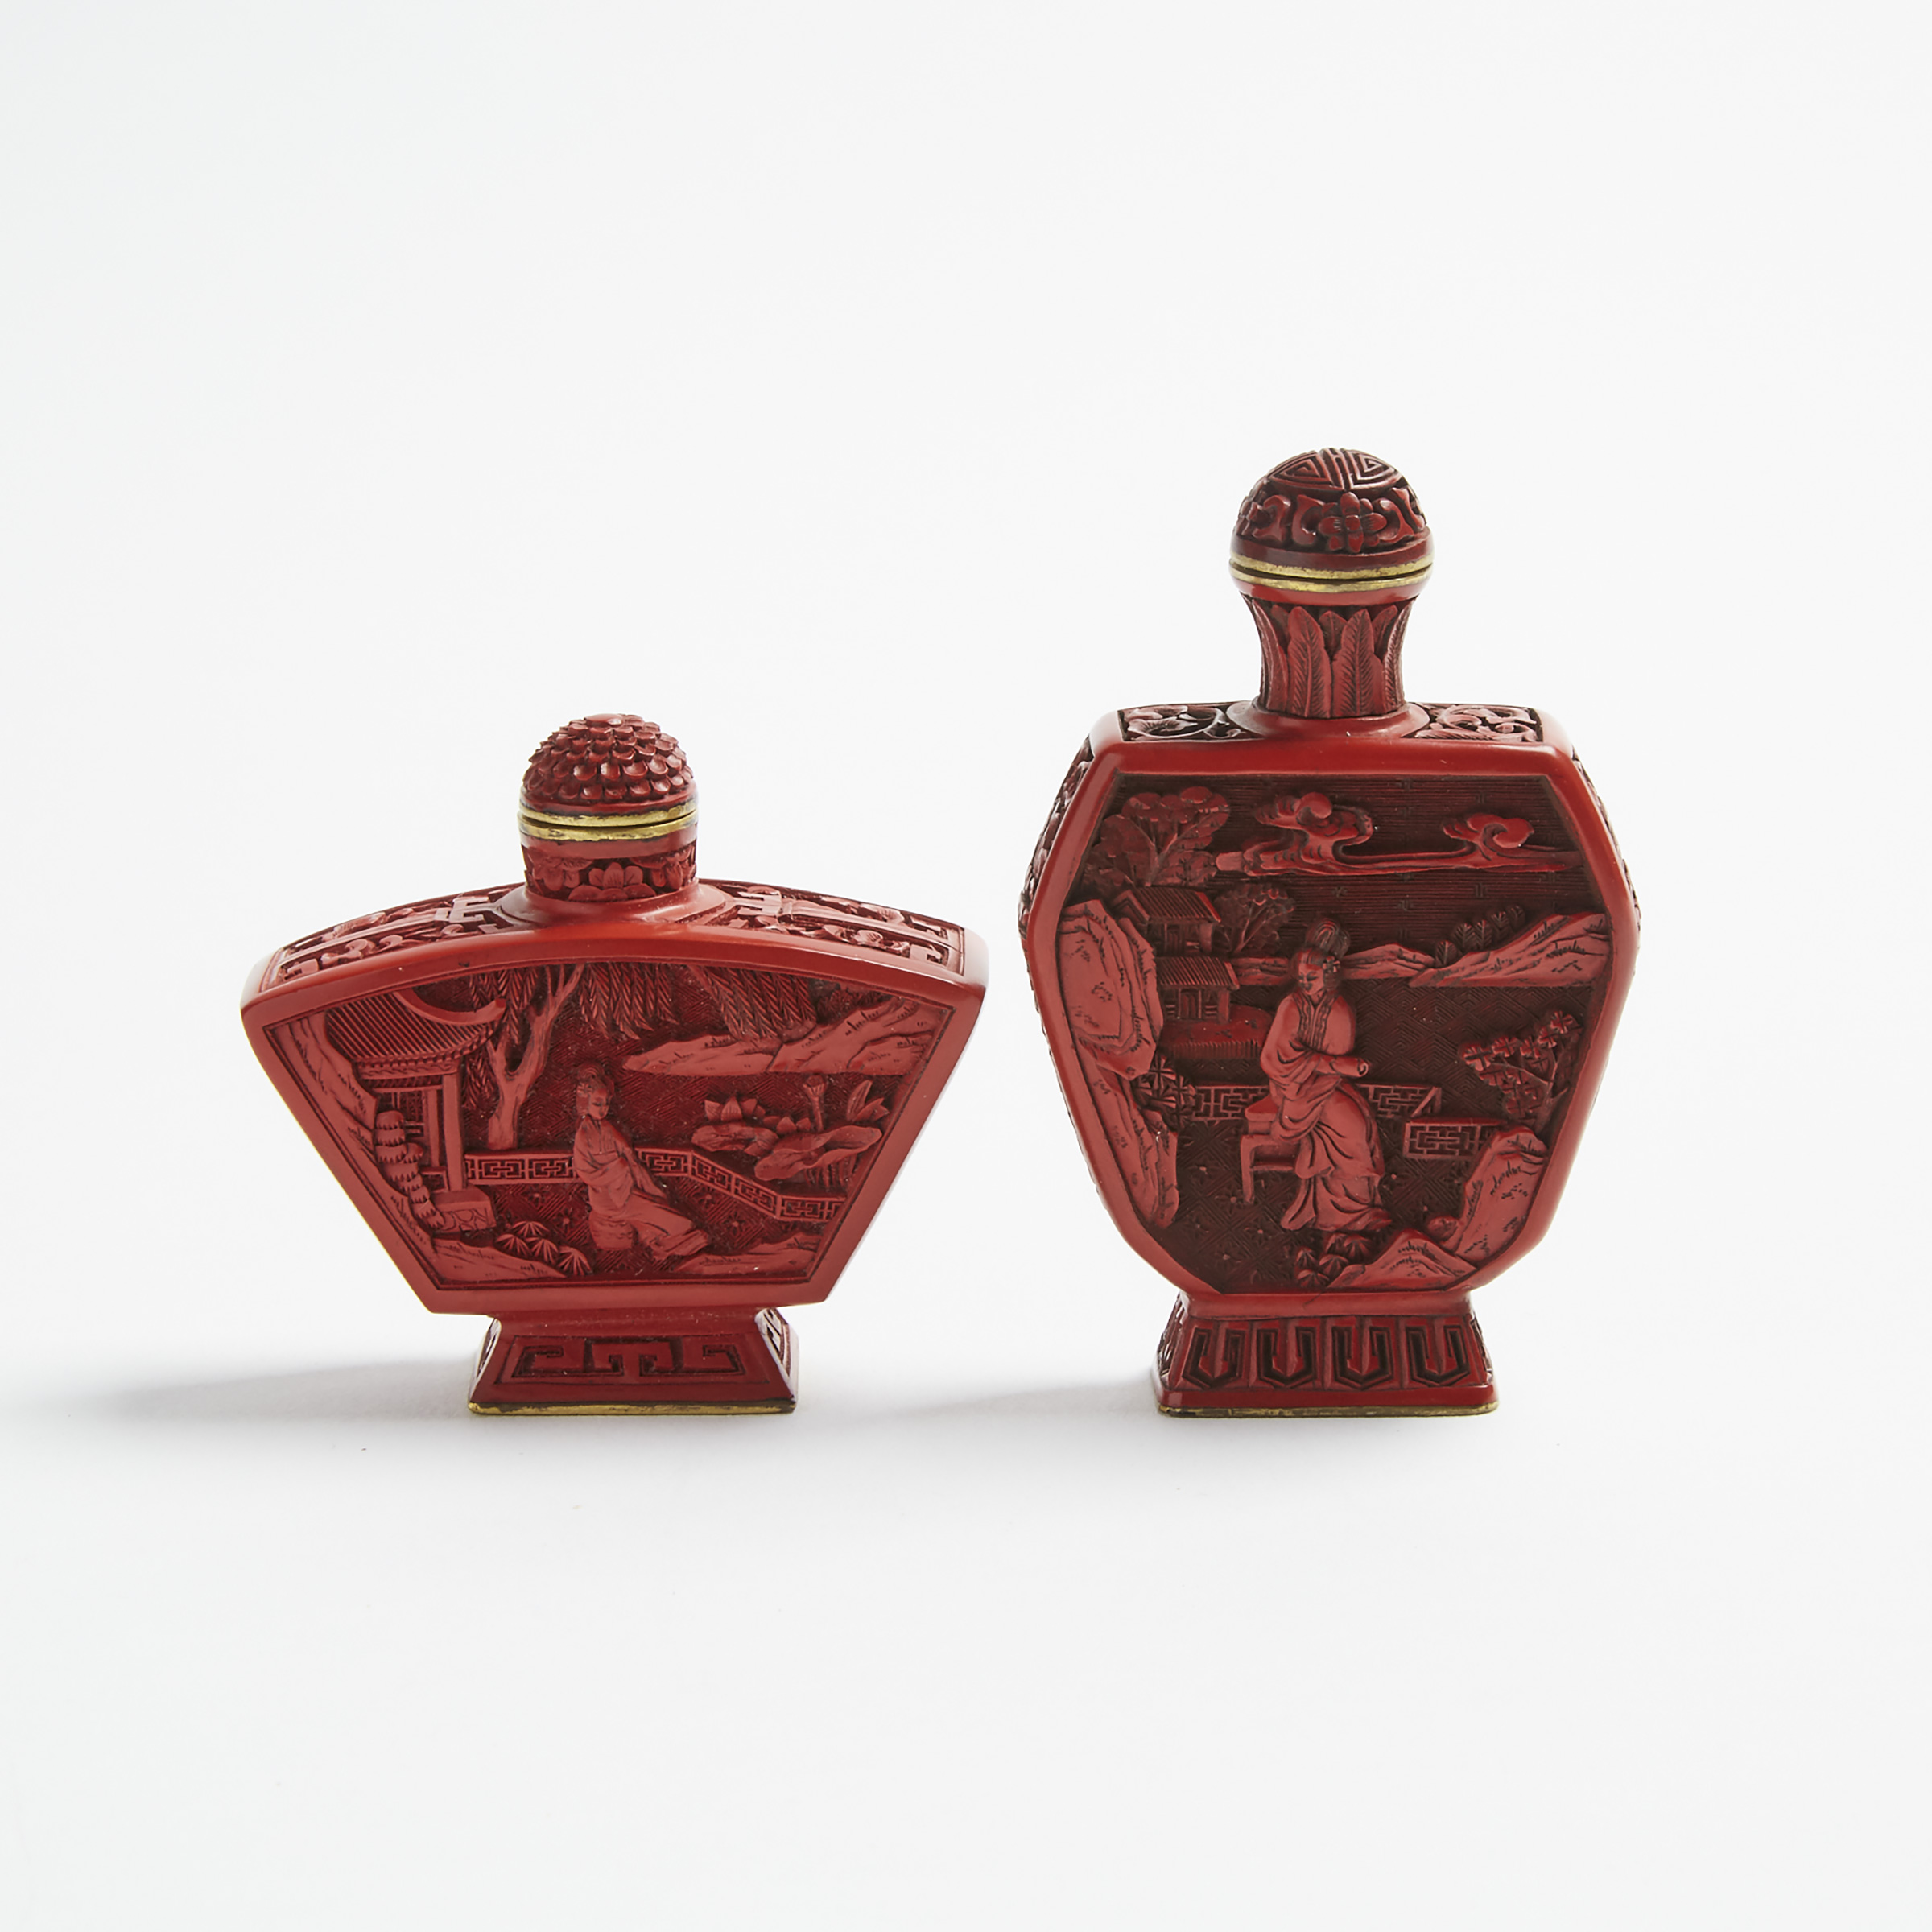 Two Cinnabar Lacquer Snuff Bottles, 19th/20th Century